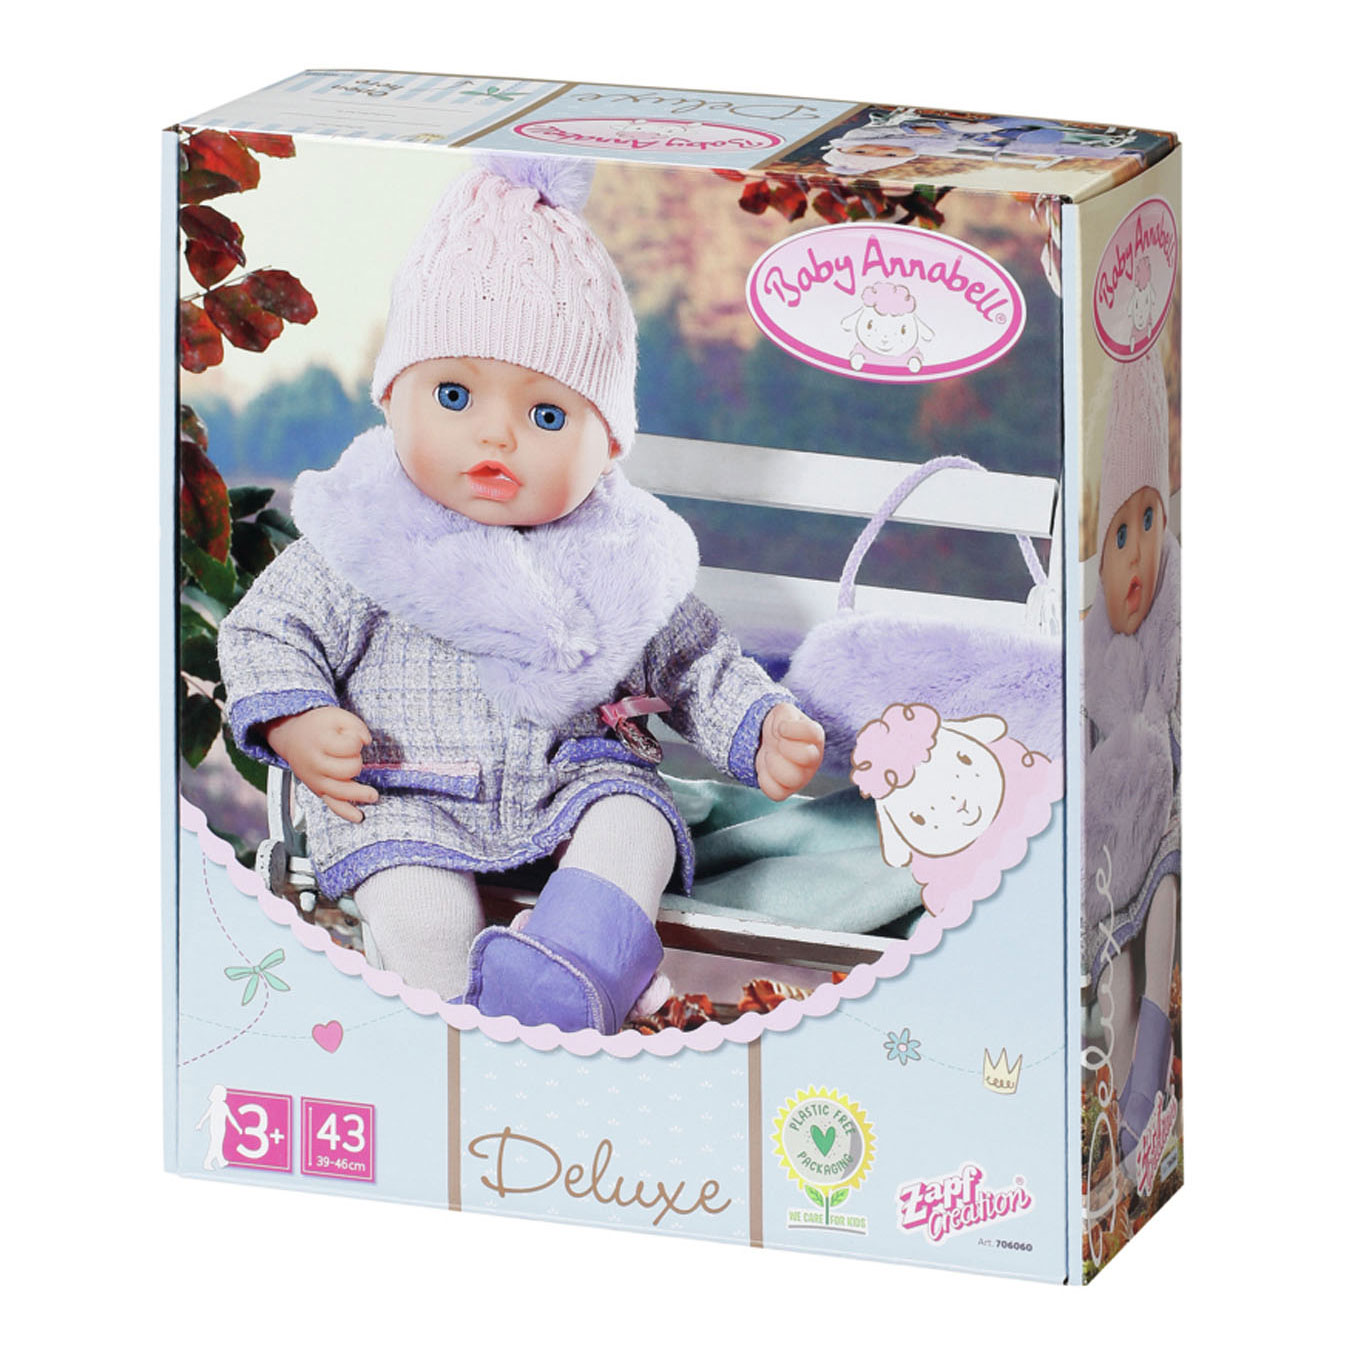 Baby Annabell Deluxe Mantel, 43cm